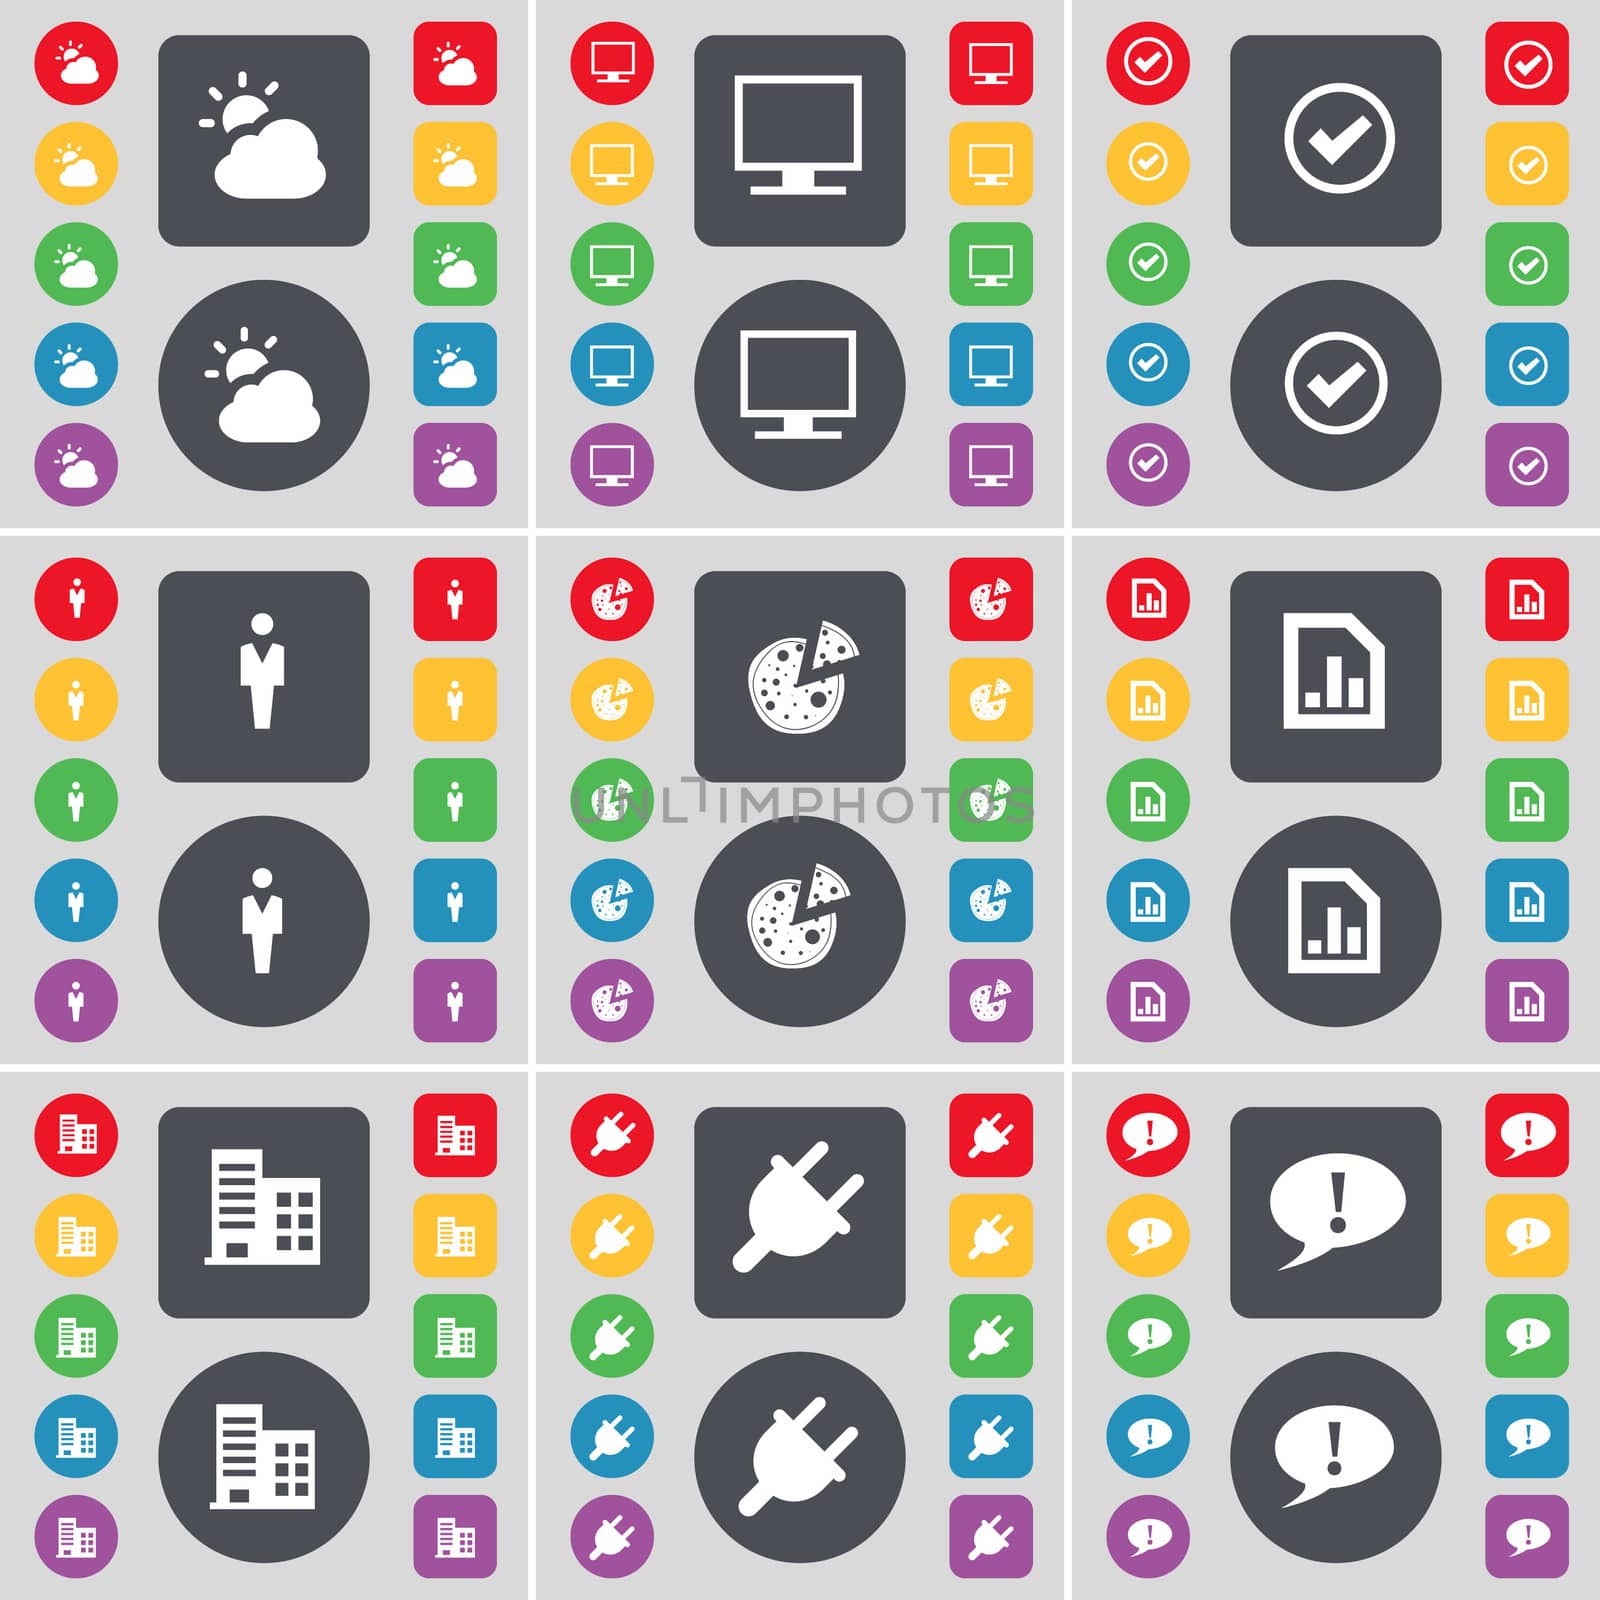 Cloud, Monitor, Tick, Silhouette, Pizza, Graph file, Building, Socket, Chat bubble icon symbol. A large set of flat, colored buttons for your design. illustration